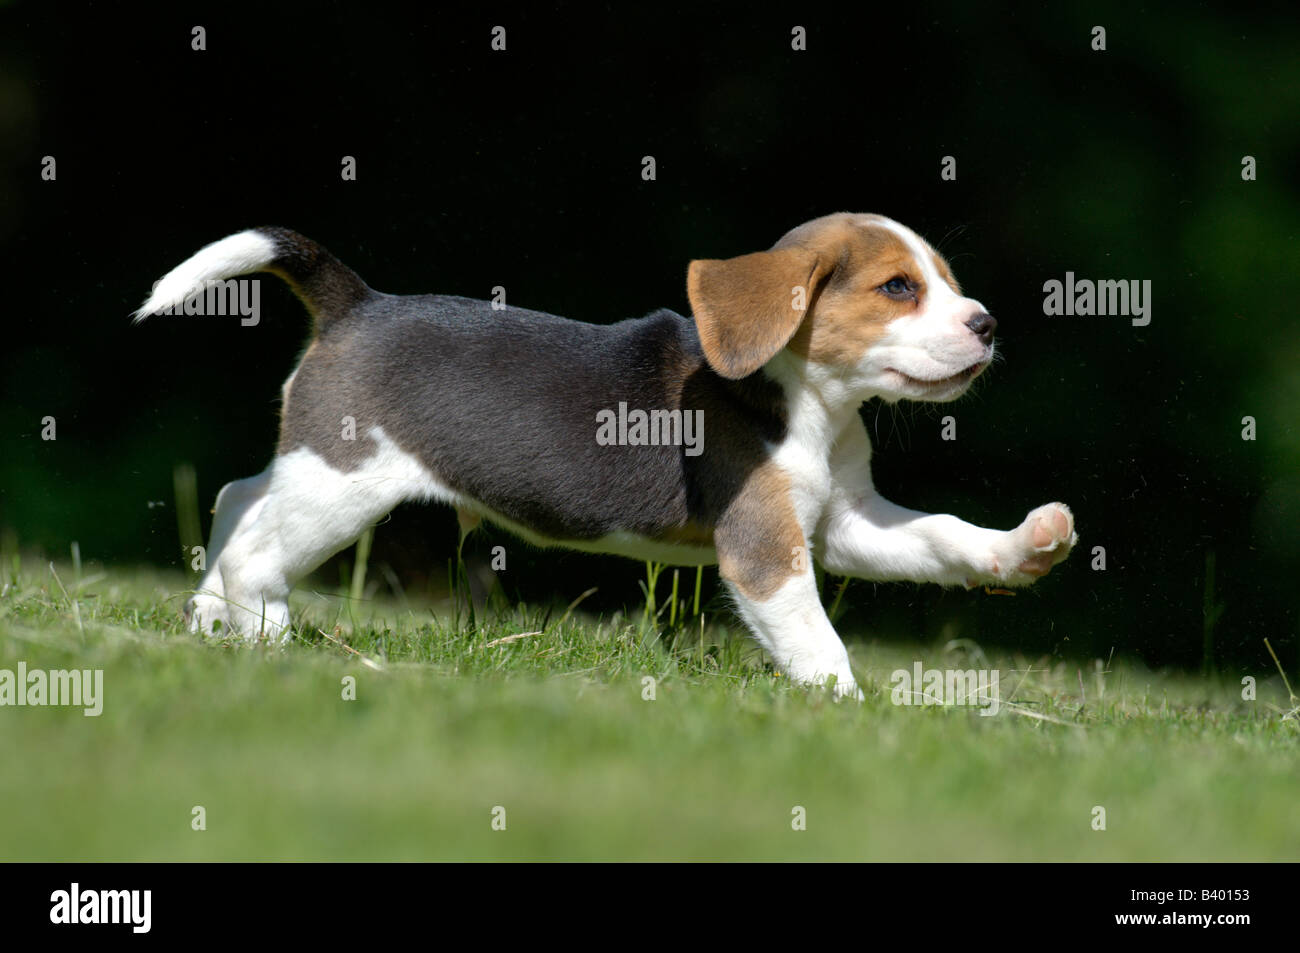 Beagle (Canis lupus familiaris), puppy running on grass Stock Photo